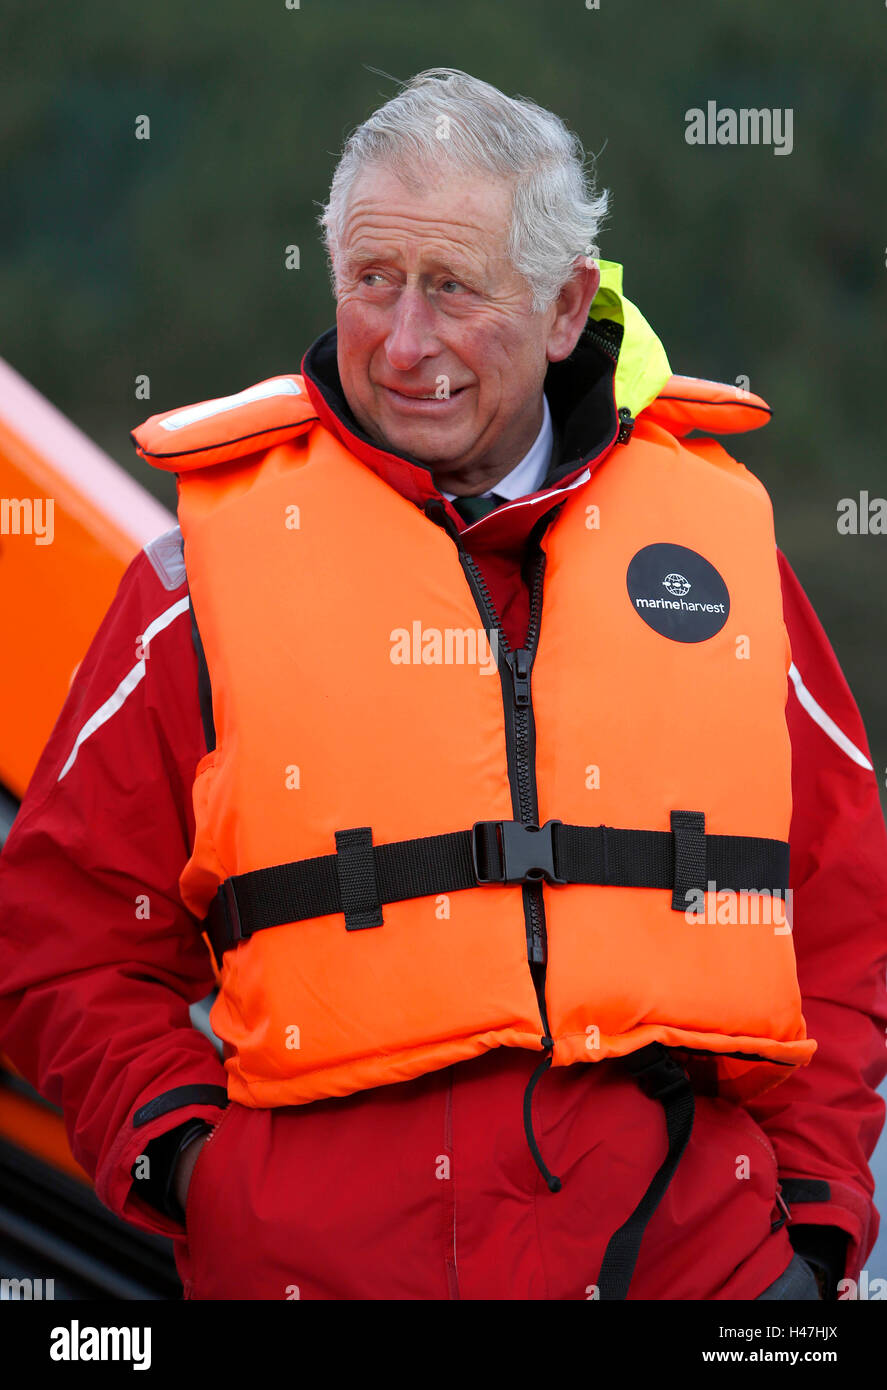 The Prince of Wales, known as the Duke of Rothesay while in Scotland, during a visit to a sustainable salmon farm at Marine Harvest's Loch Leven Fish Farm, on Loch Leven at Onich, by Fort William, Inverness-shire. Stock Photo